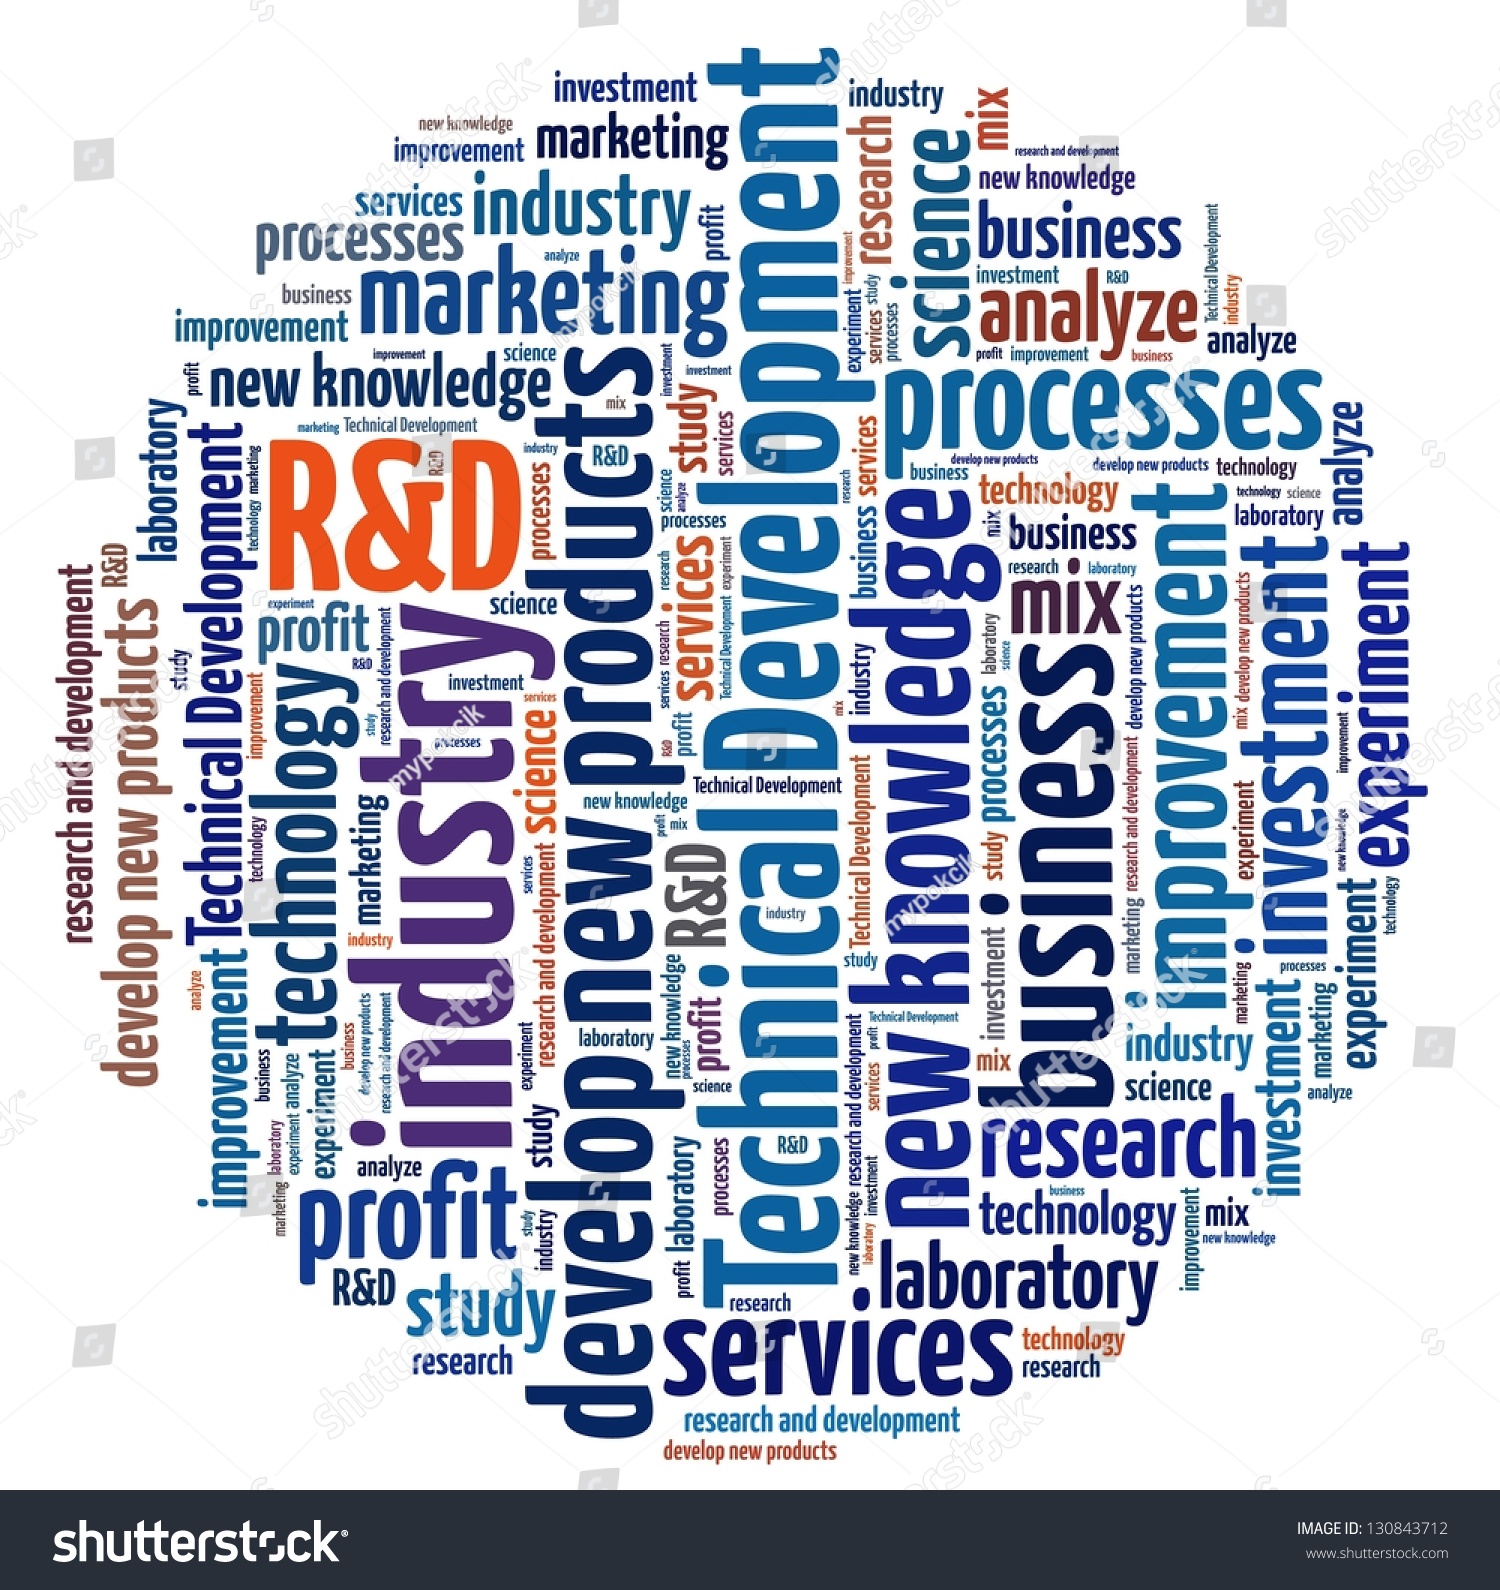 Research And Development In Word Collage Stock Photo 130843712 ...